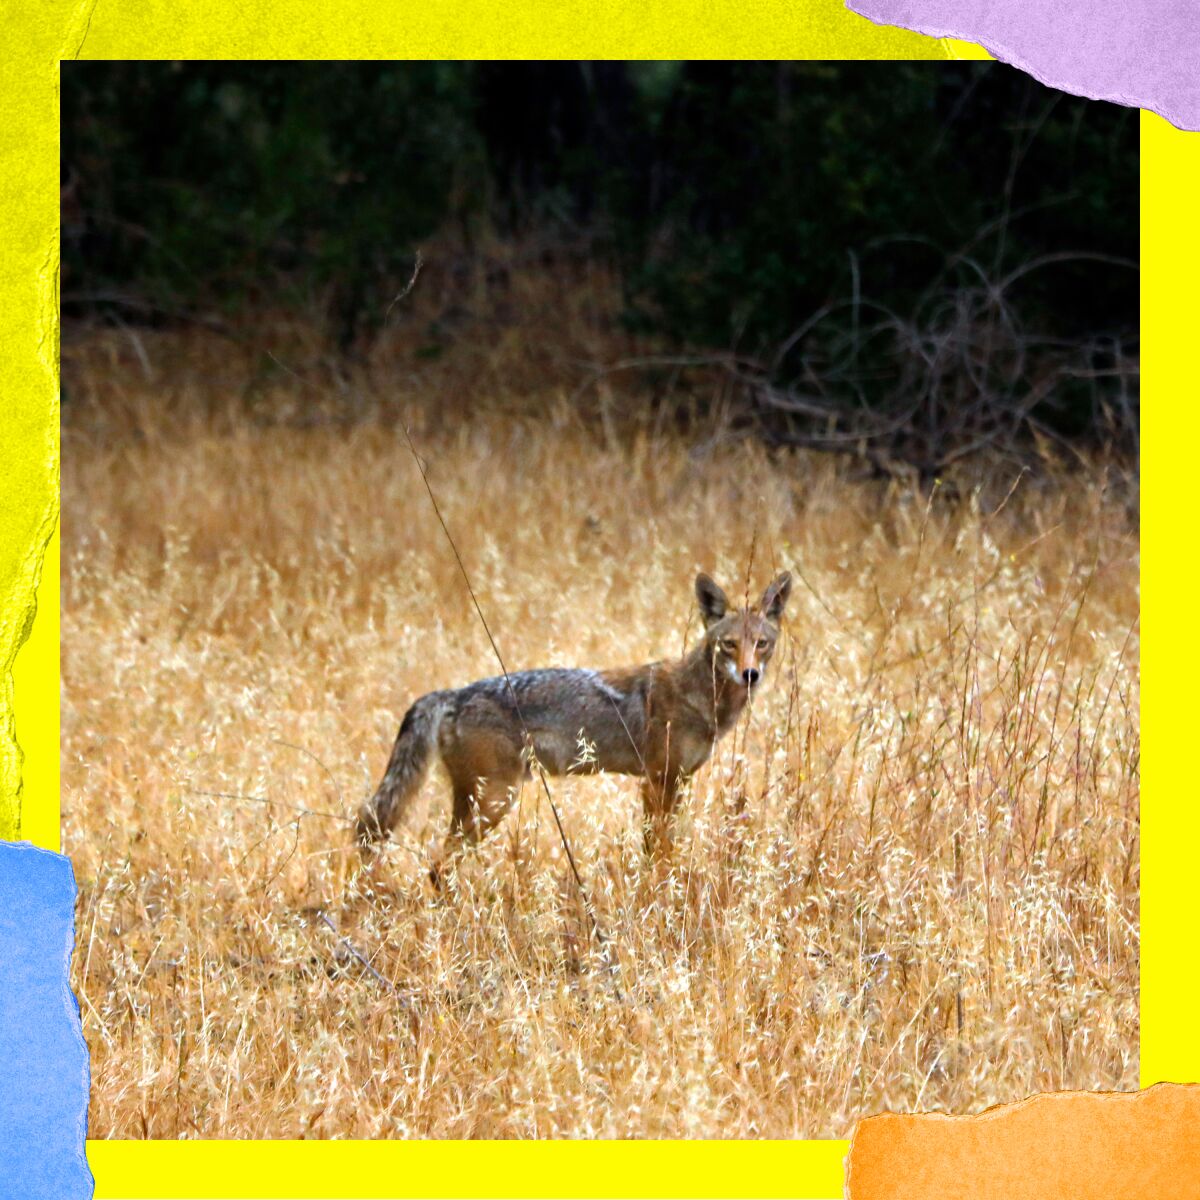 A coyote stands in the middle of dry grass on a hillside.